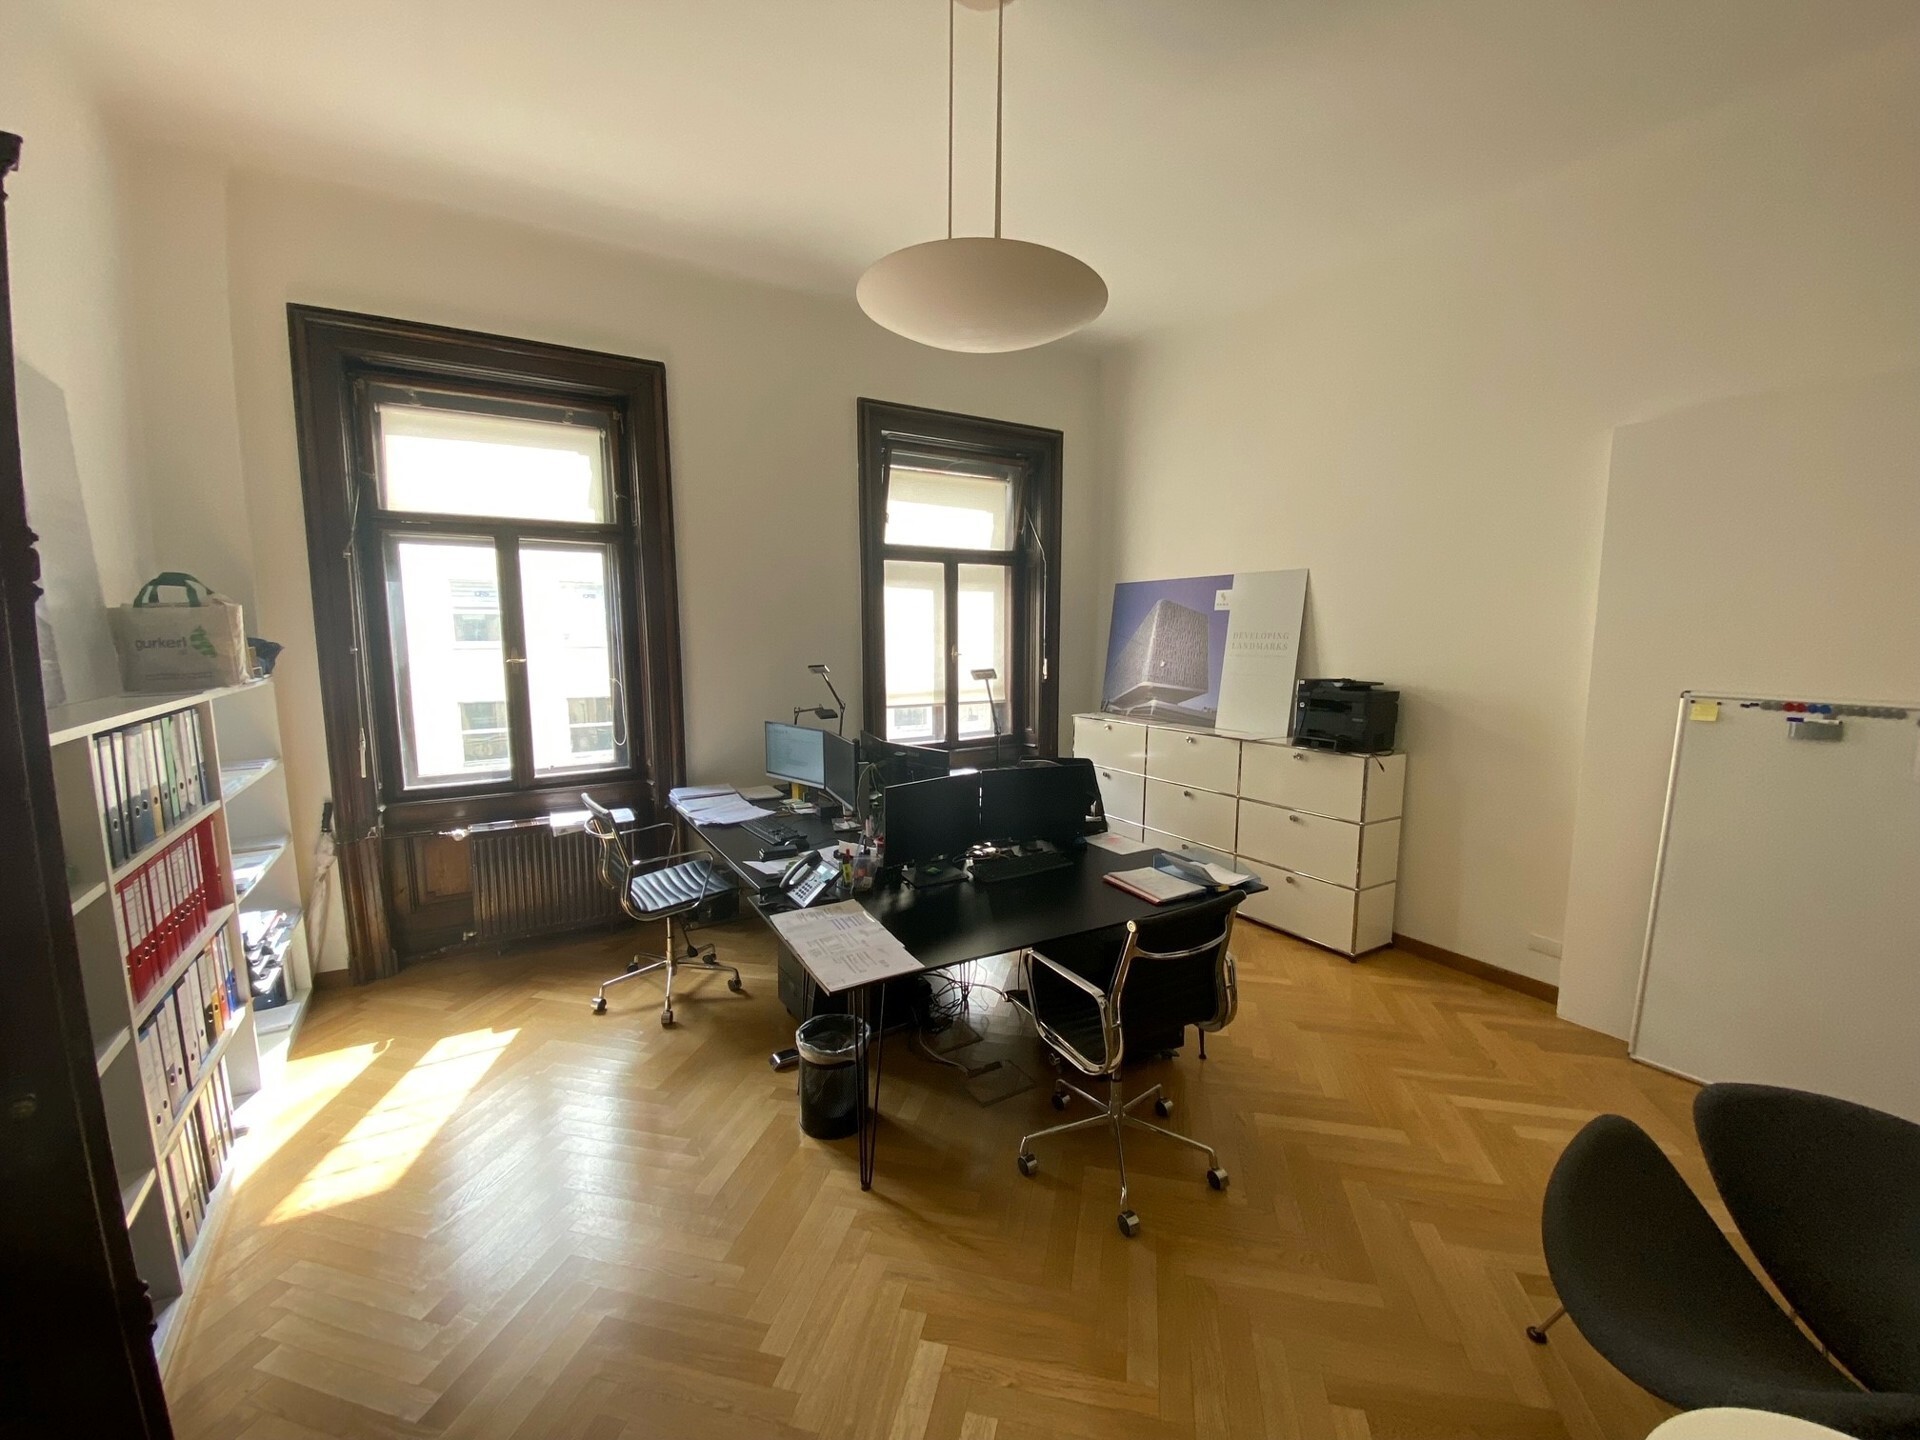 Office space for rent in prime location on Stephansplatz